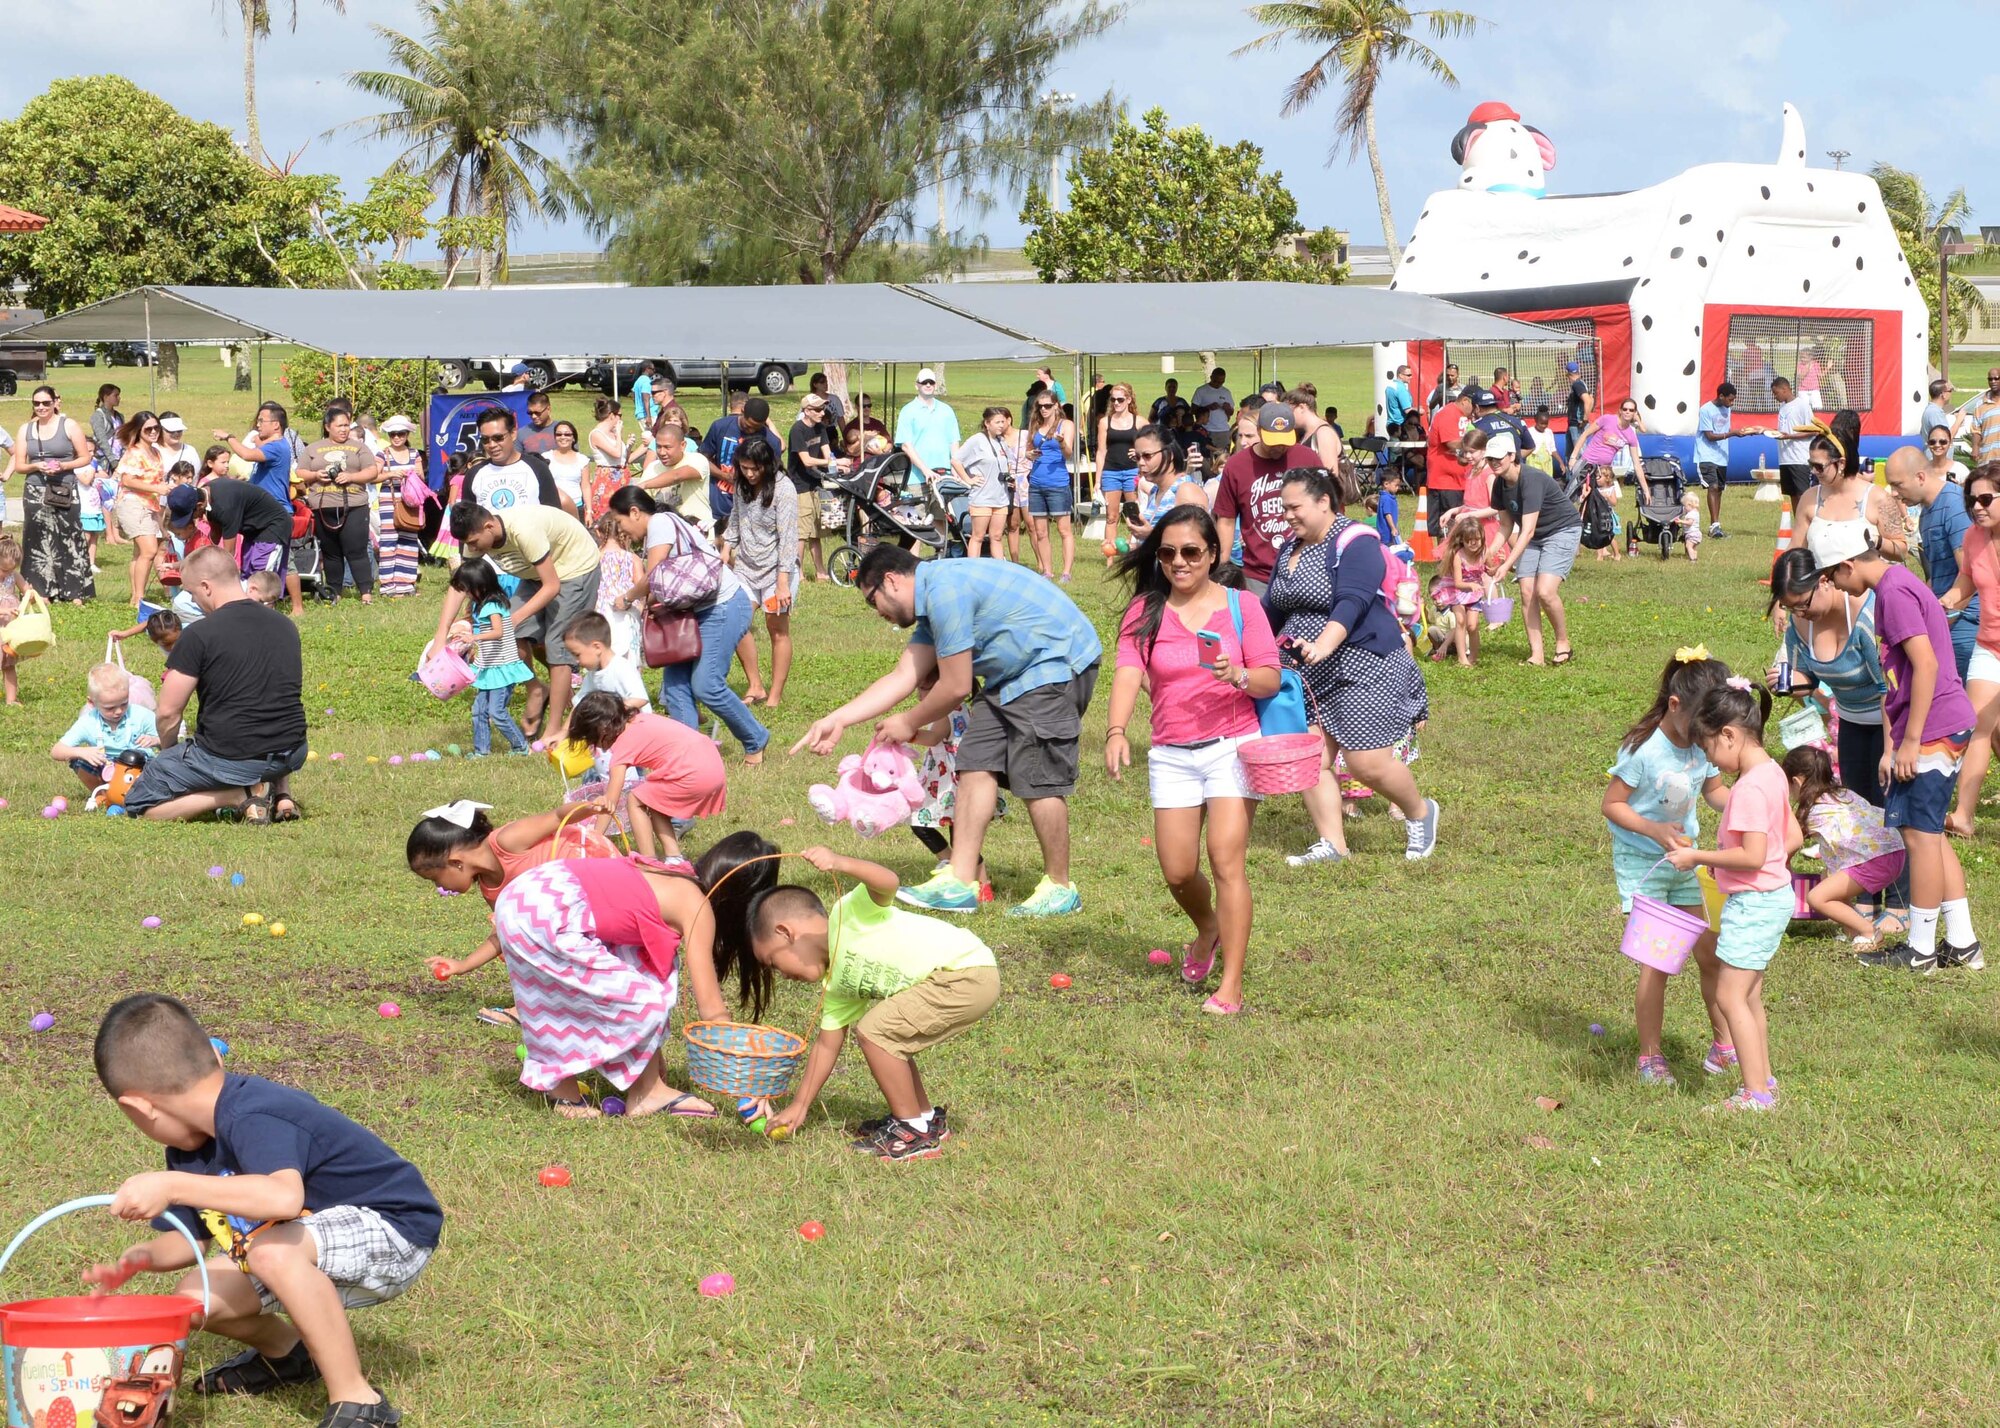 Andersen family members participate in an Easter egg hunt April 4, 2015, at Arc Light Memorial Park on Andersen Air Force Base, Guam. The annual event, which used approximately 7,000 eggs, was sponsored by a host of agencies across the base and drew more than 650 children. (U.S. Air Force photo by Senior Airman Cierra Presentado/Released)